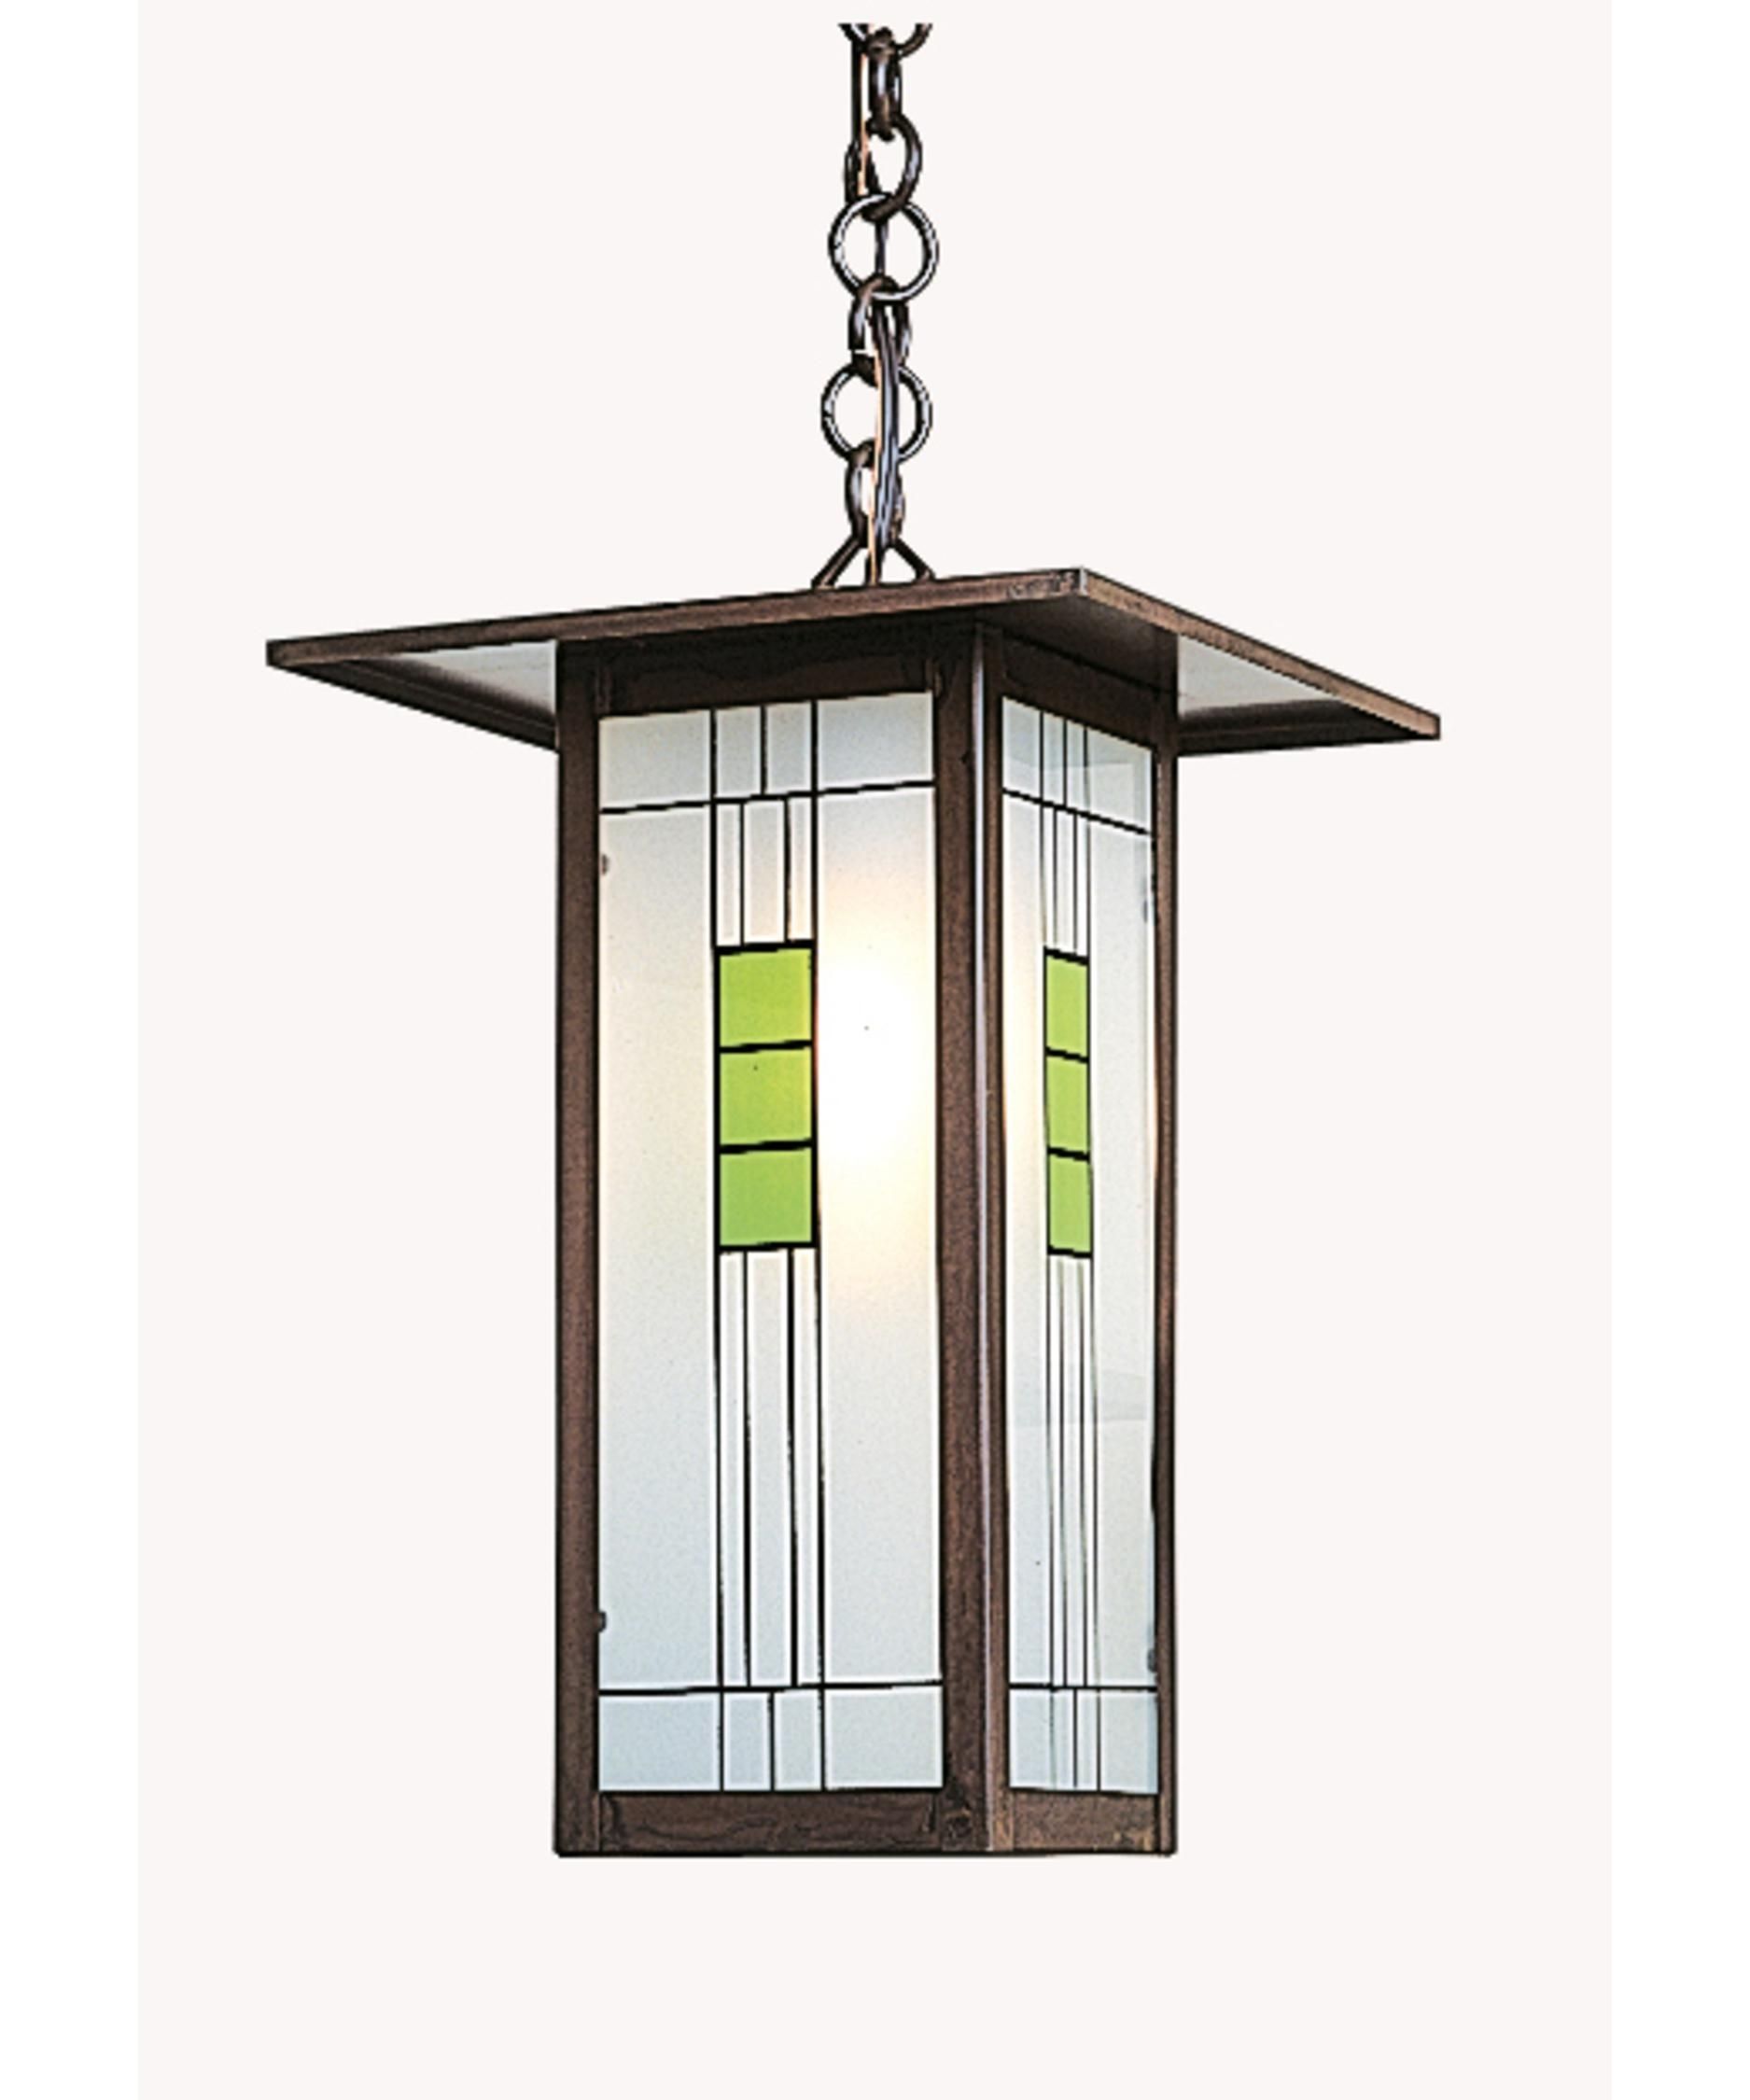 Arroyo Craftsman Fh 9l Franklin 9 Inch Wide 1 Light Outdoor Hanging For Craftsman Outdoor Ceiling Lights (View 2 of 15)